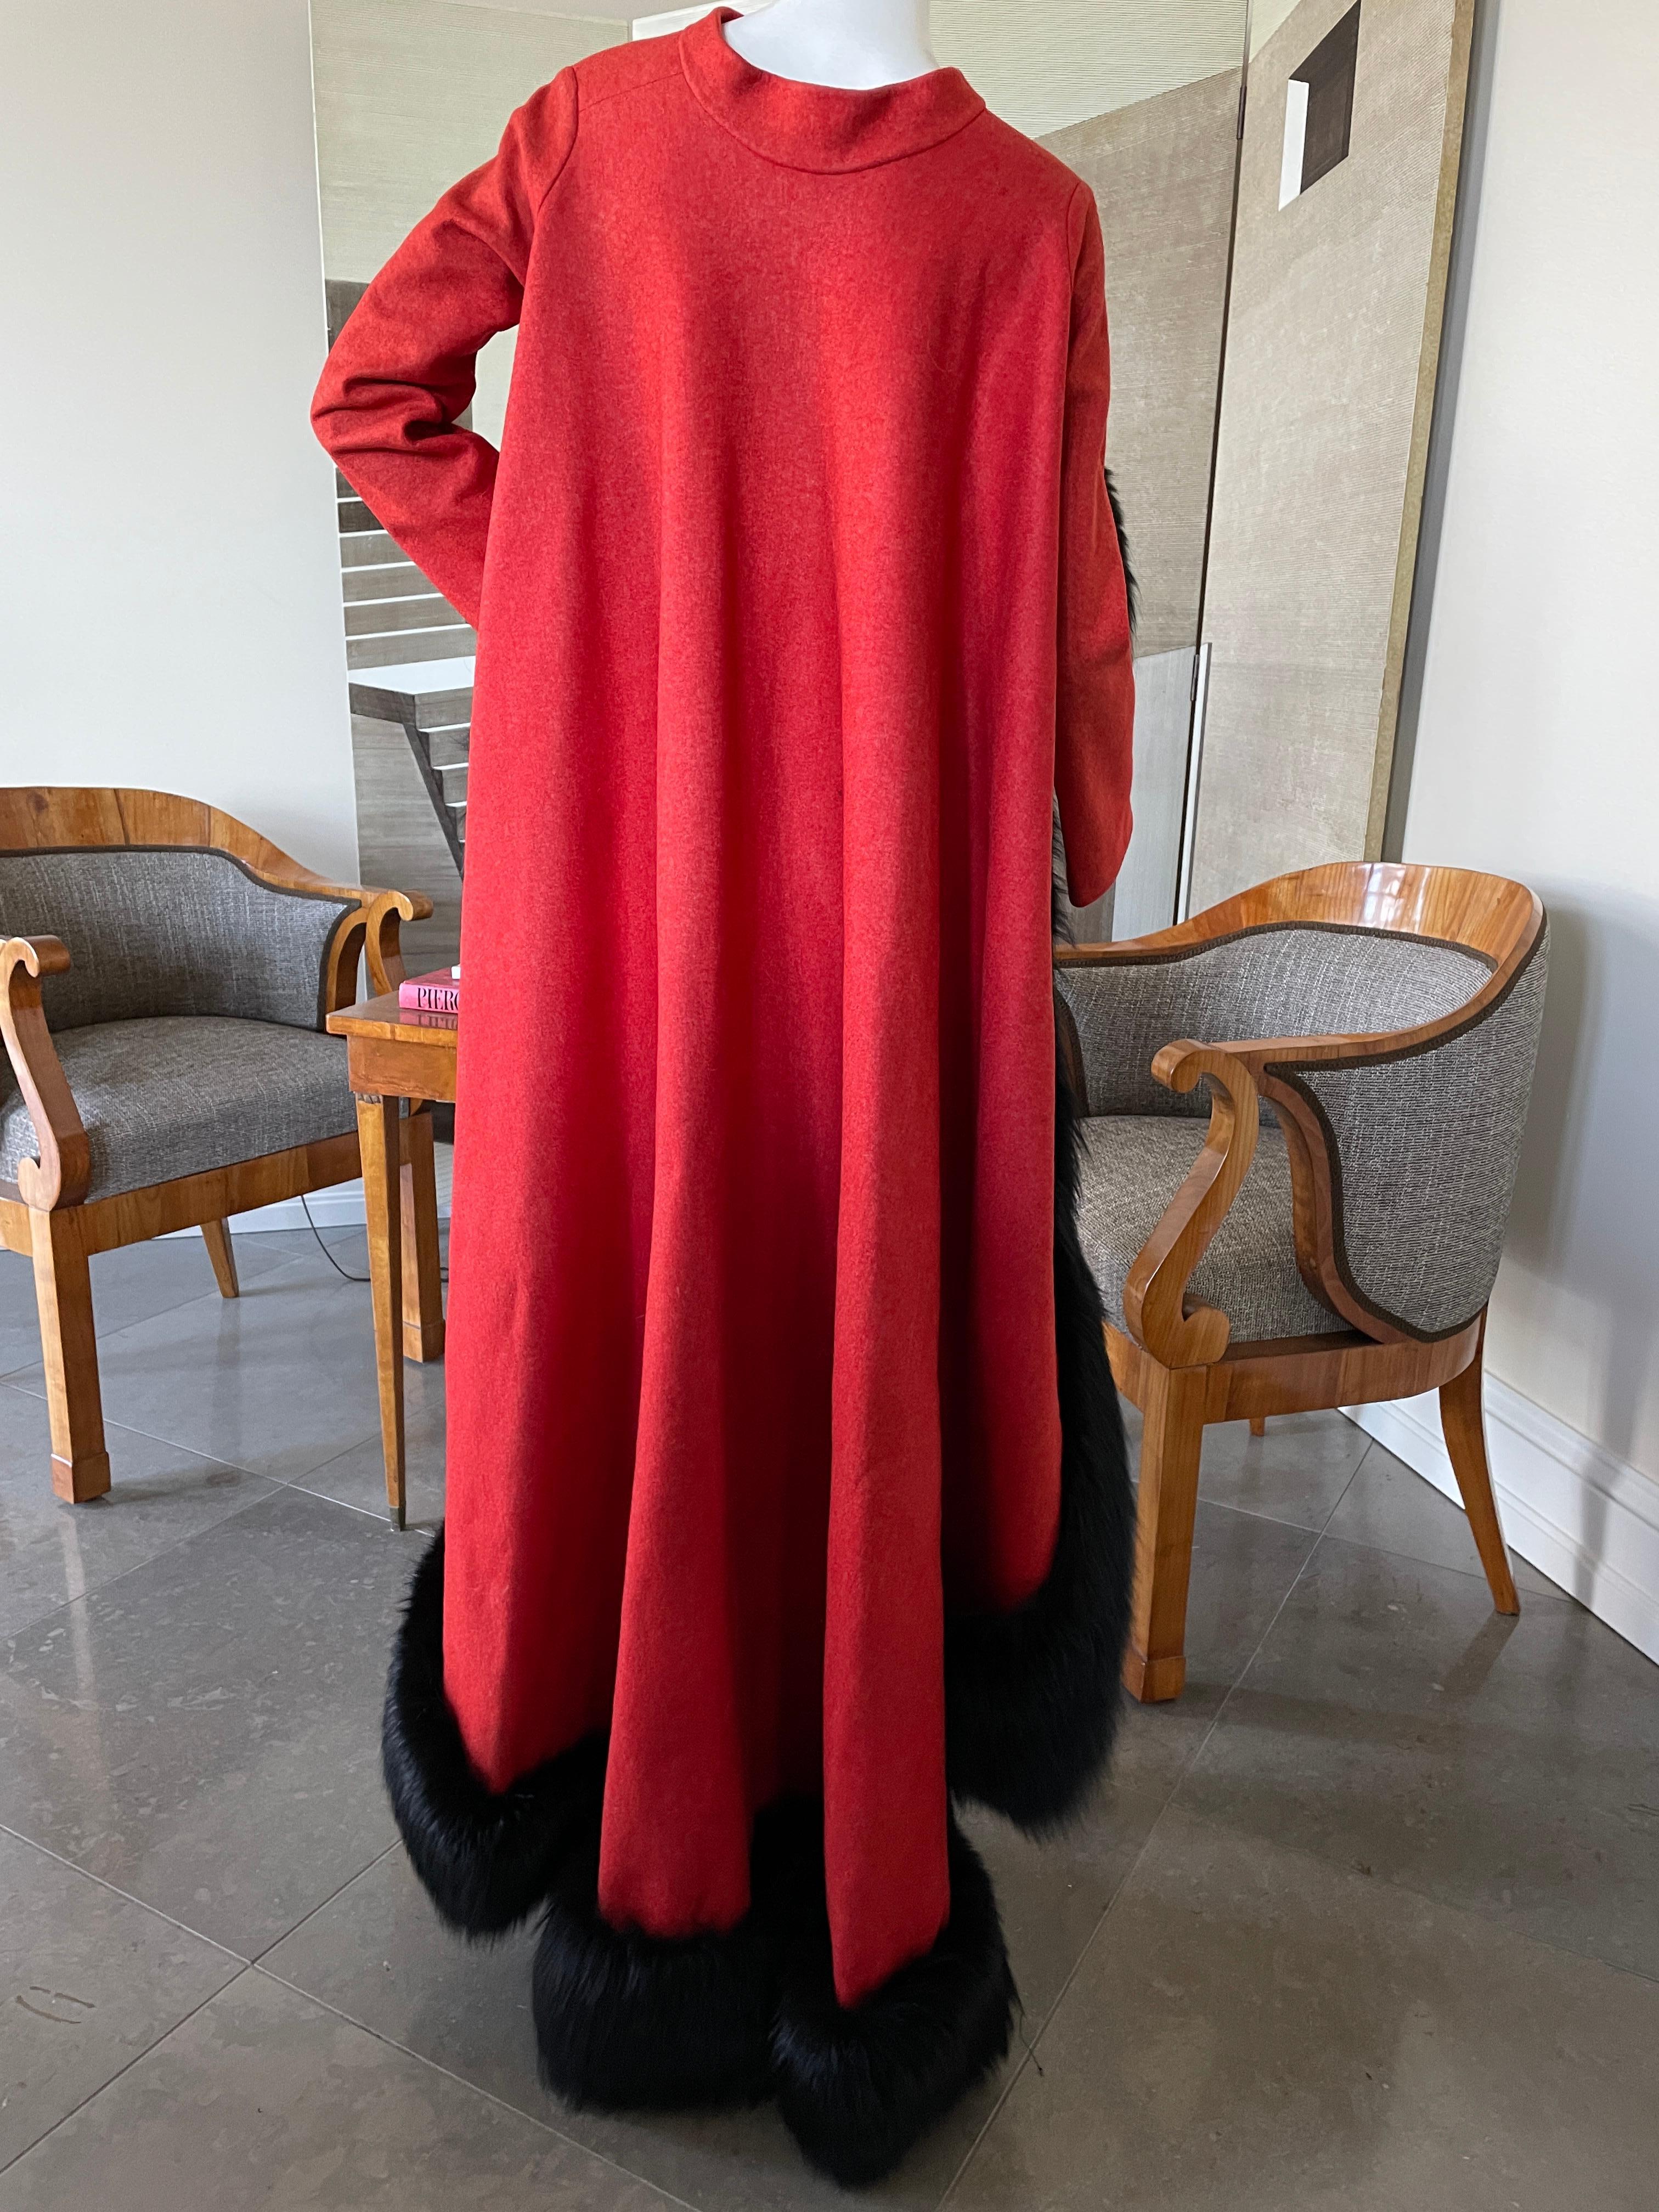 Arnold Scaasi Dramatic Red Opera Cape Trimmed in Black Fox In Fair Condition For Sale In Cloverdale, CA